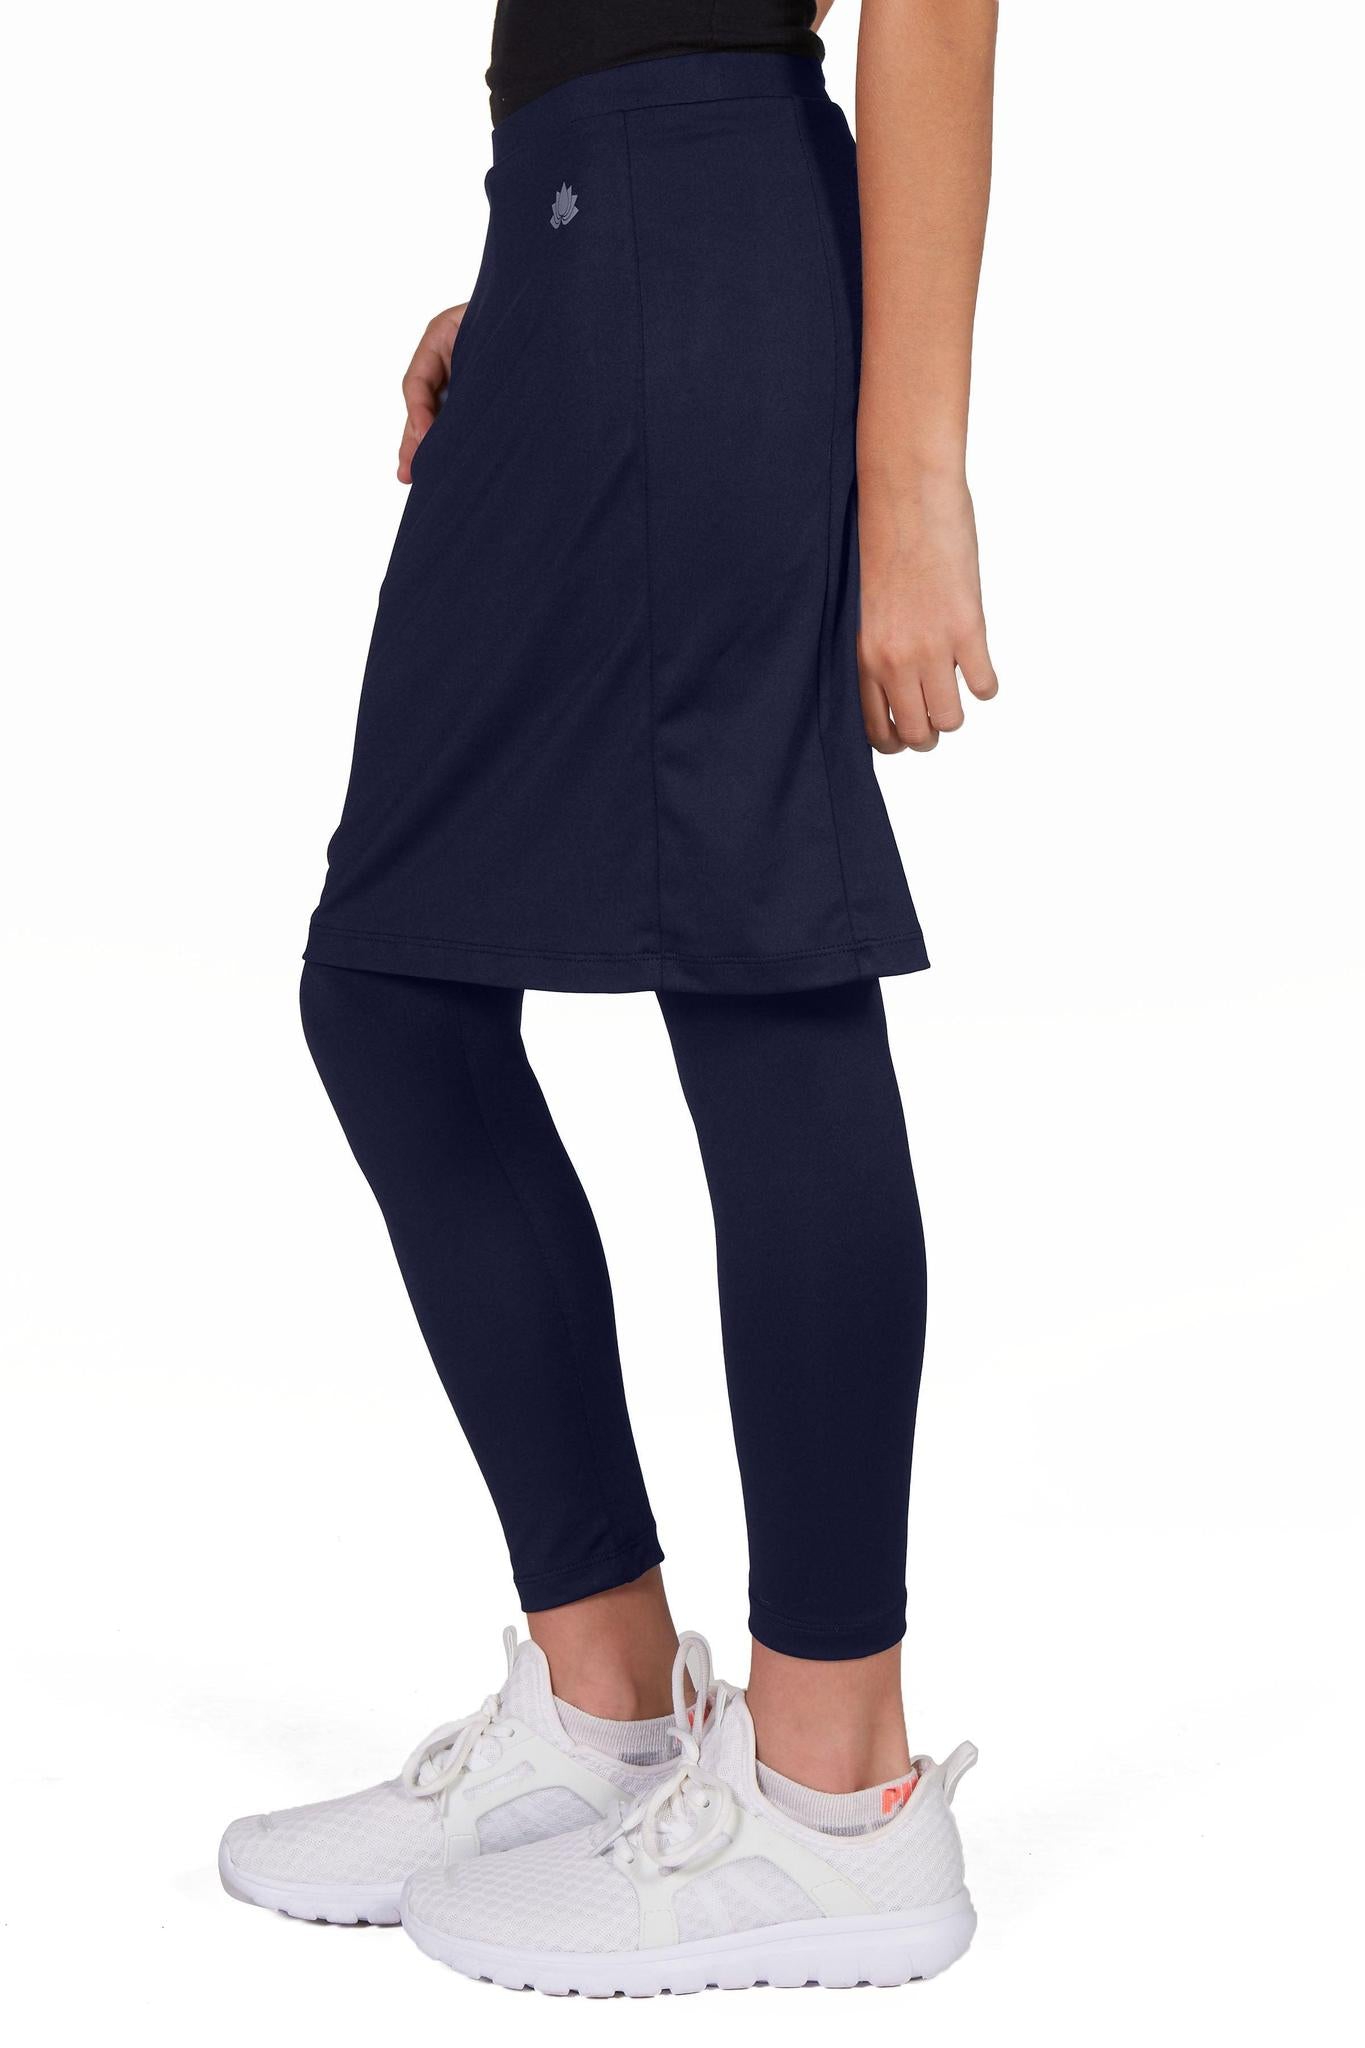 GIRLS Ankle Fit Snoga Athletic Skirt in Navy